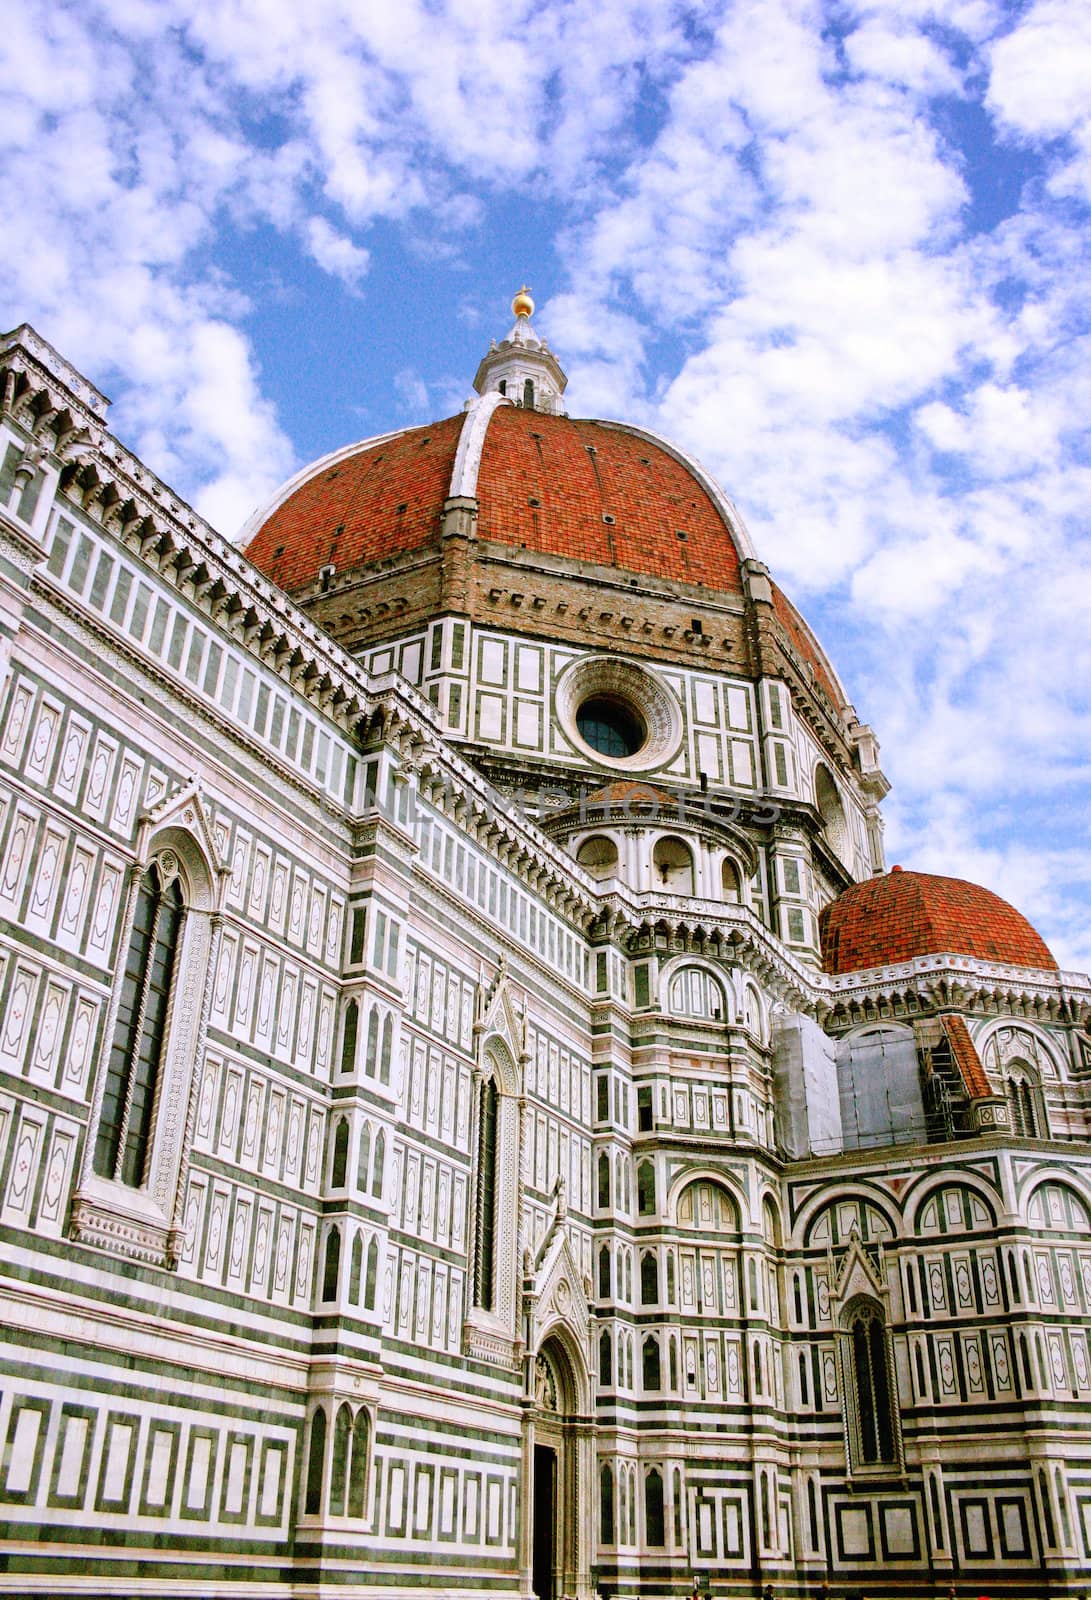 Architectural detail of The Cathedral Dome of Santa Maria del fiore in Florence city, Italy